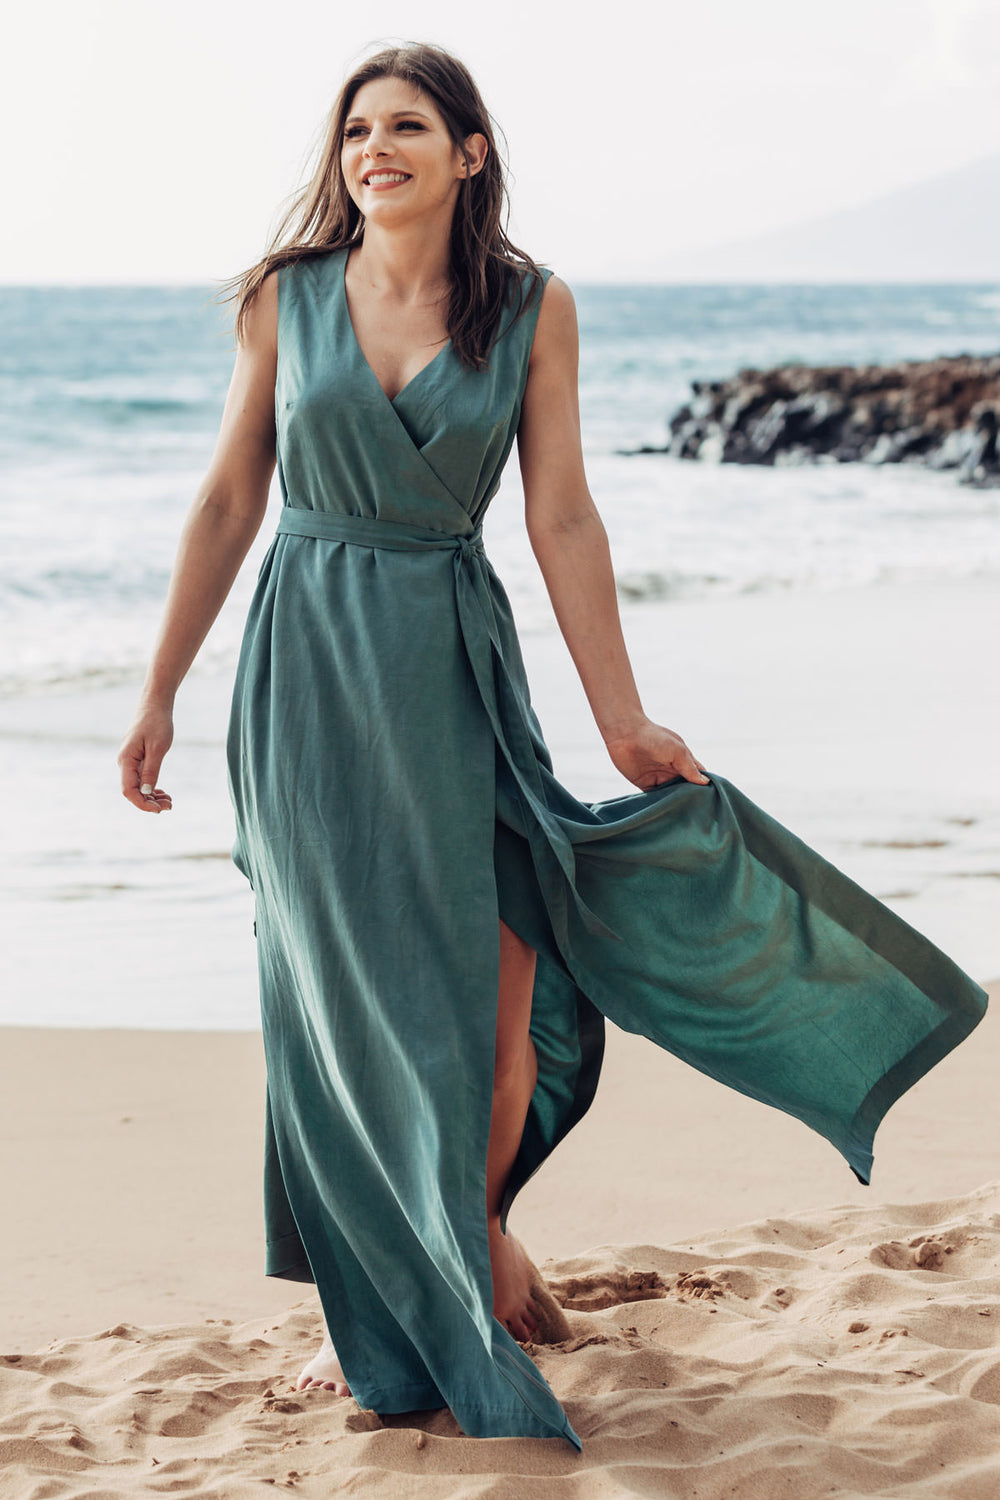 Woman wearing the Highlands Wrap Dress sewing pattern from Allie Olson on The Fold Line. A dress pattern made in rayon/linen blends, rayon challis, tencel, crepe de chine, or georgette fabric, featuring a sleeveless wrap silhouette, faced V-neckline, elas